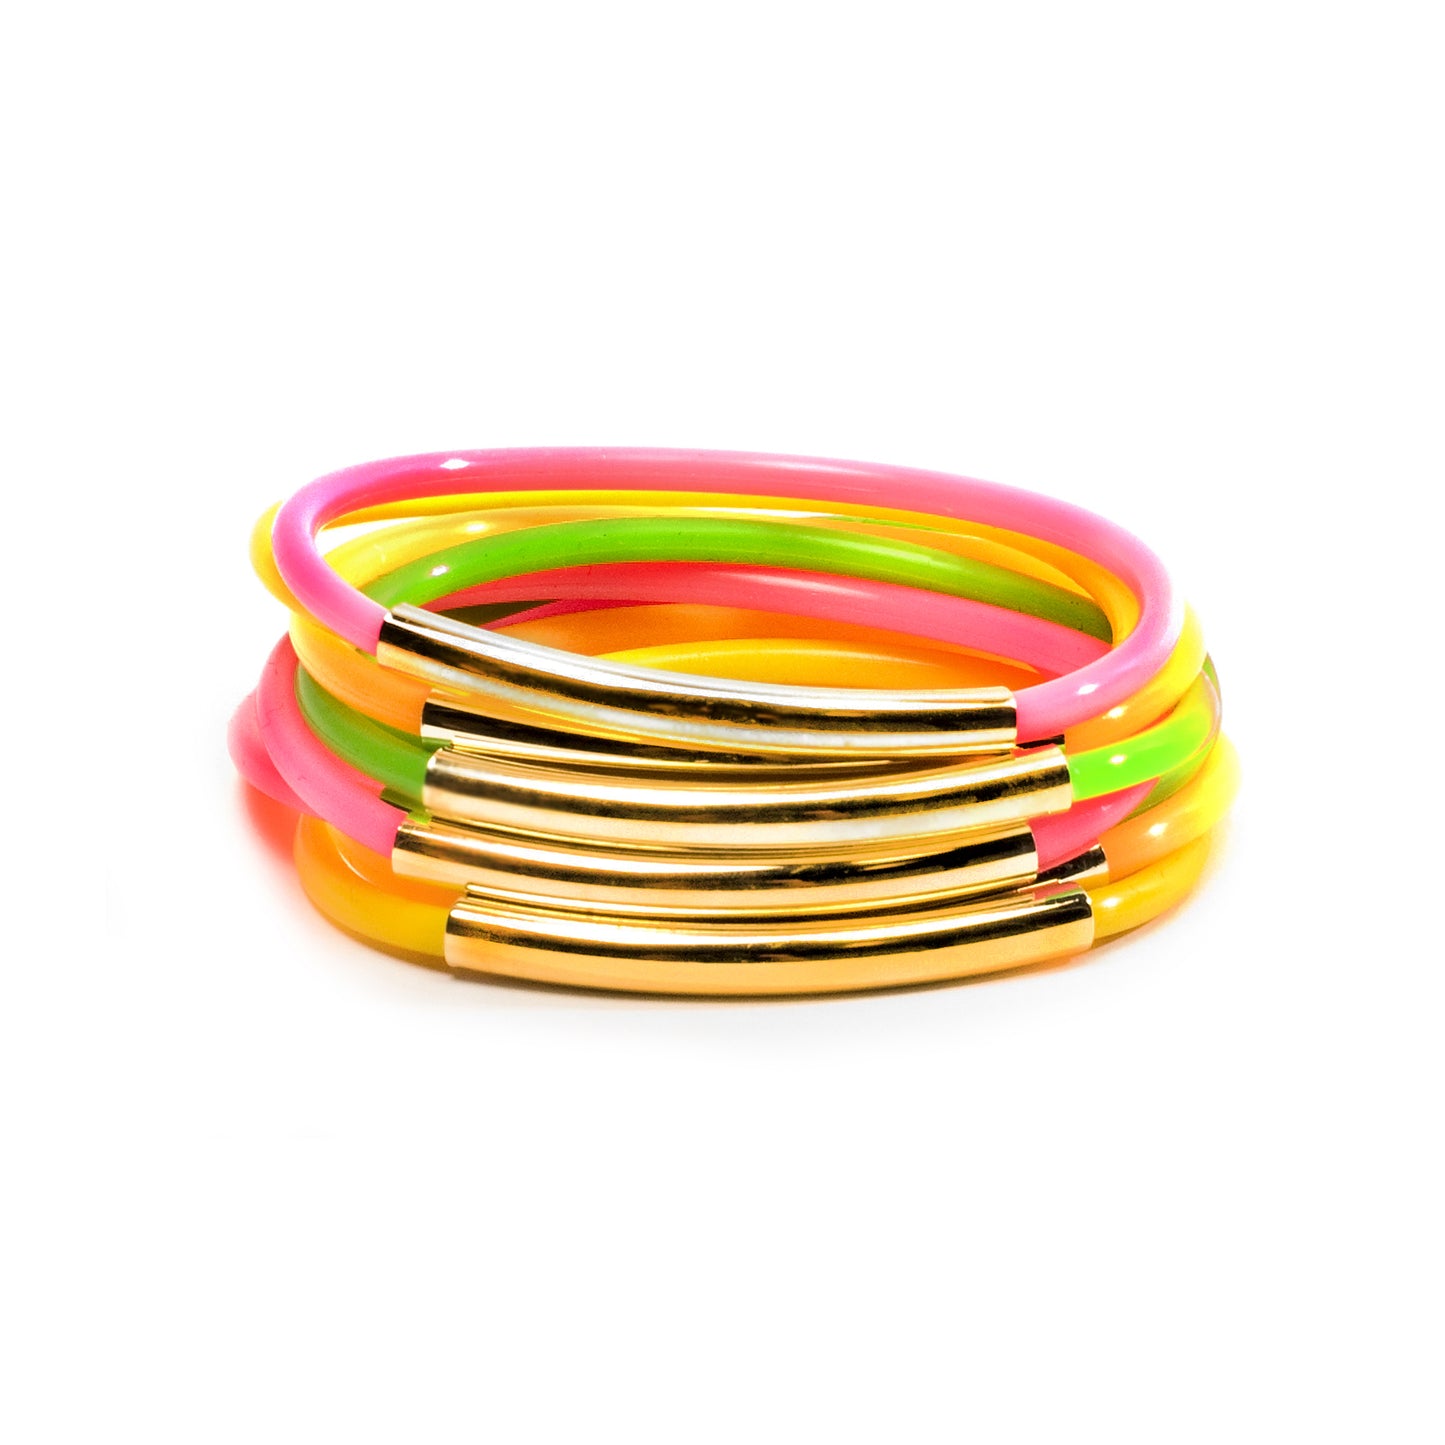 NEON TUBE JELLIES BRACELET STACK WITH GOLD BANDS